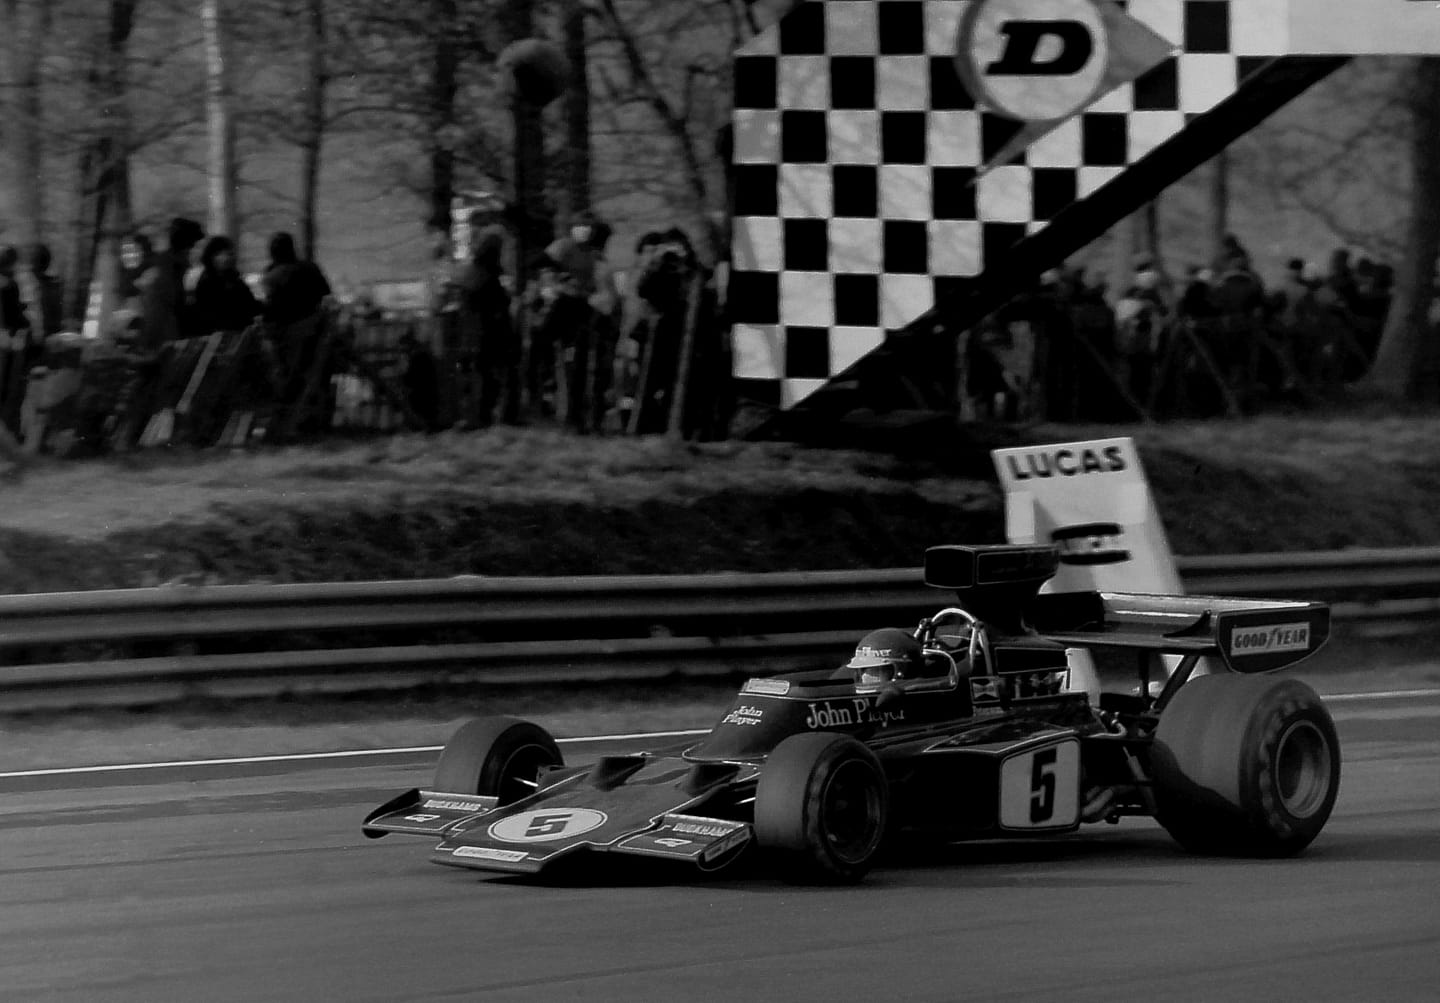 1975 Race of Champions at Brands Hatch on 16 March 1975. Third place for Ronnie Peterson, Lotus.